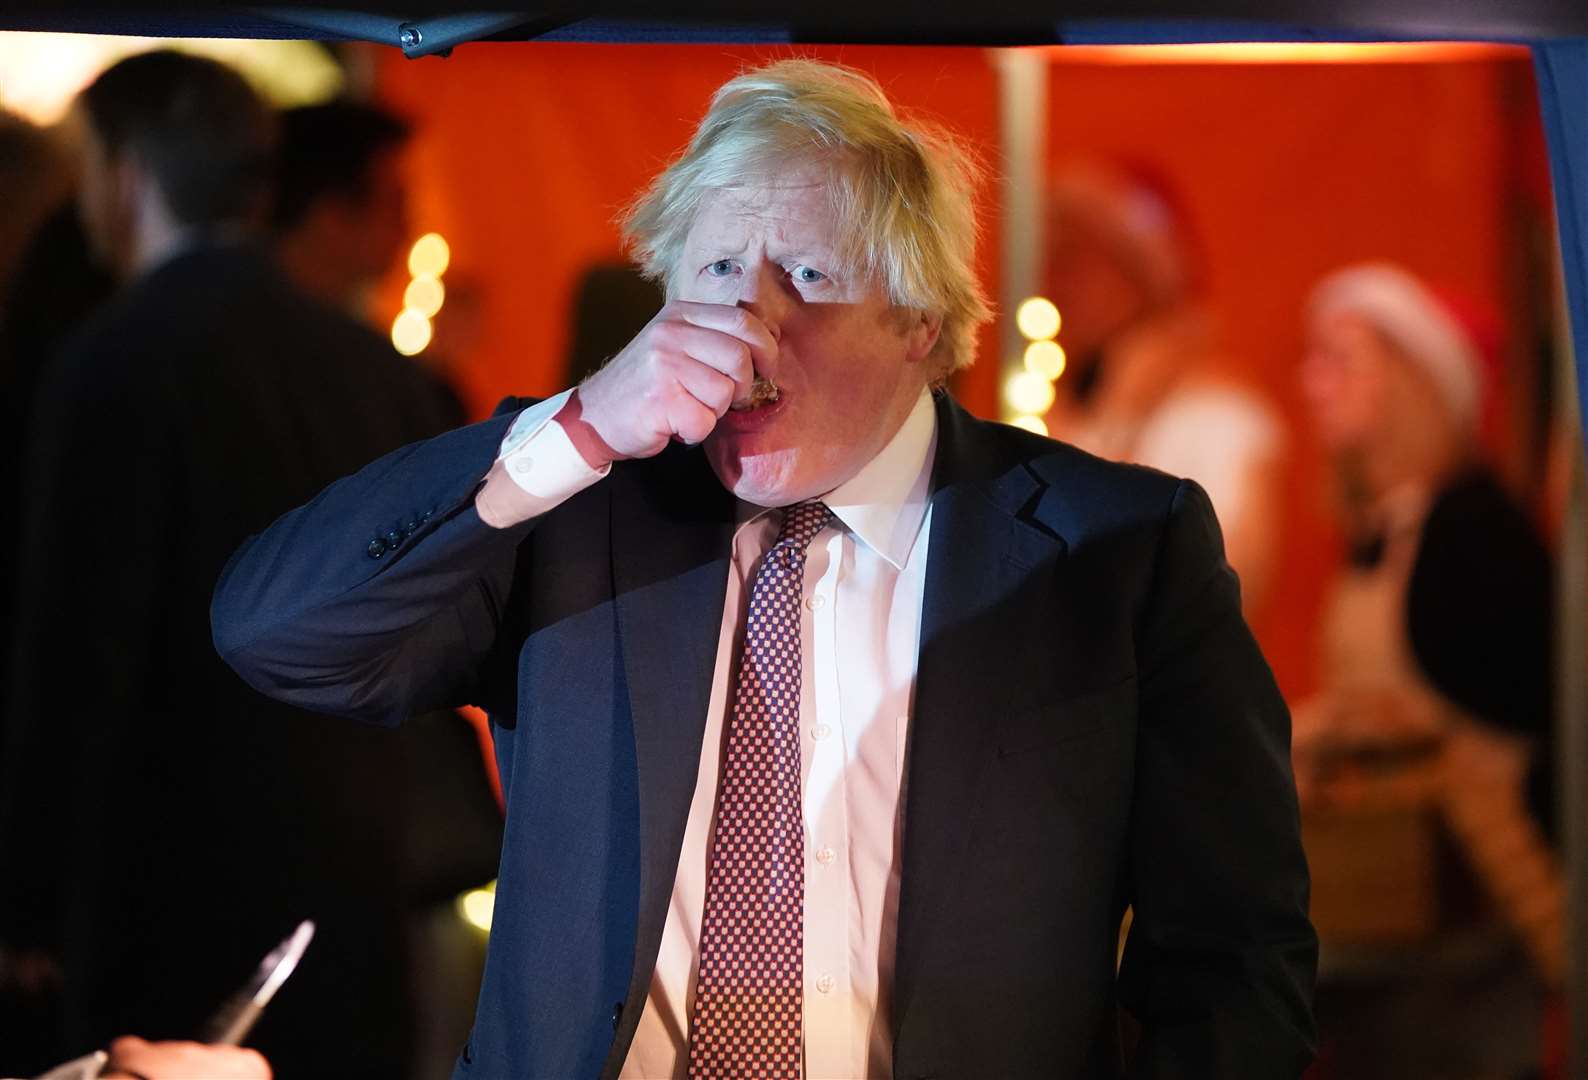 Boris Johnson samples the goods as he visits a UK Food and Drinks market set up in Downing Street on Tuesday (Stefan Rousseau/PA)